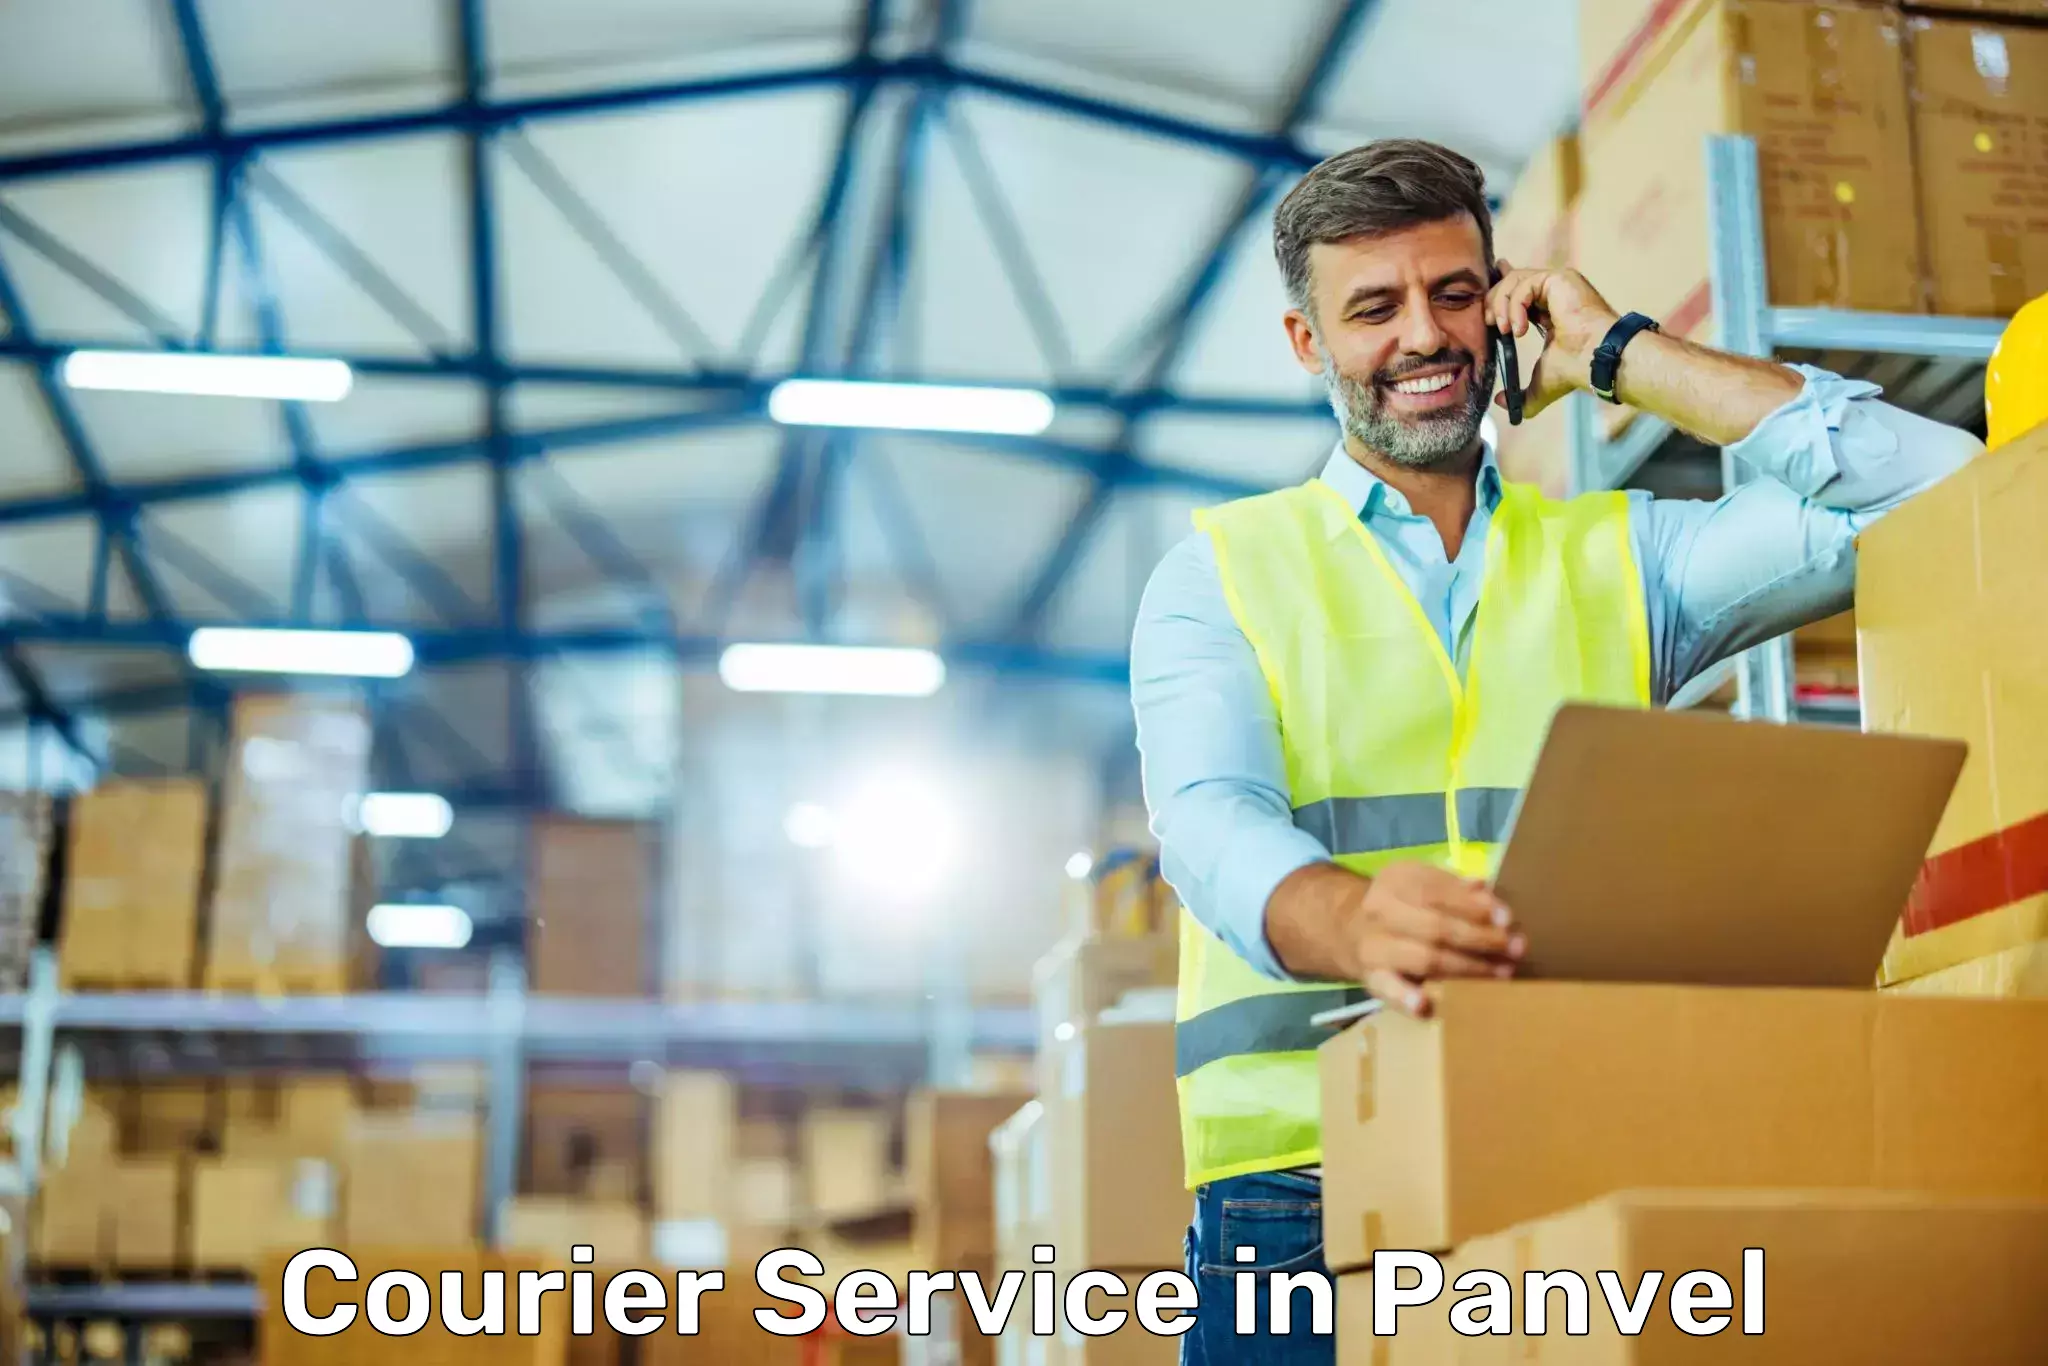 Overnight delivery in Panvel